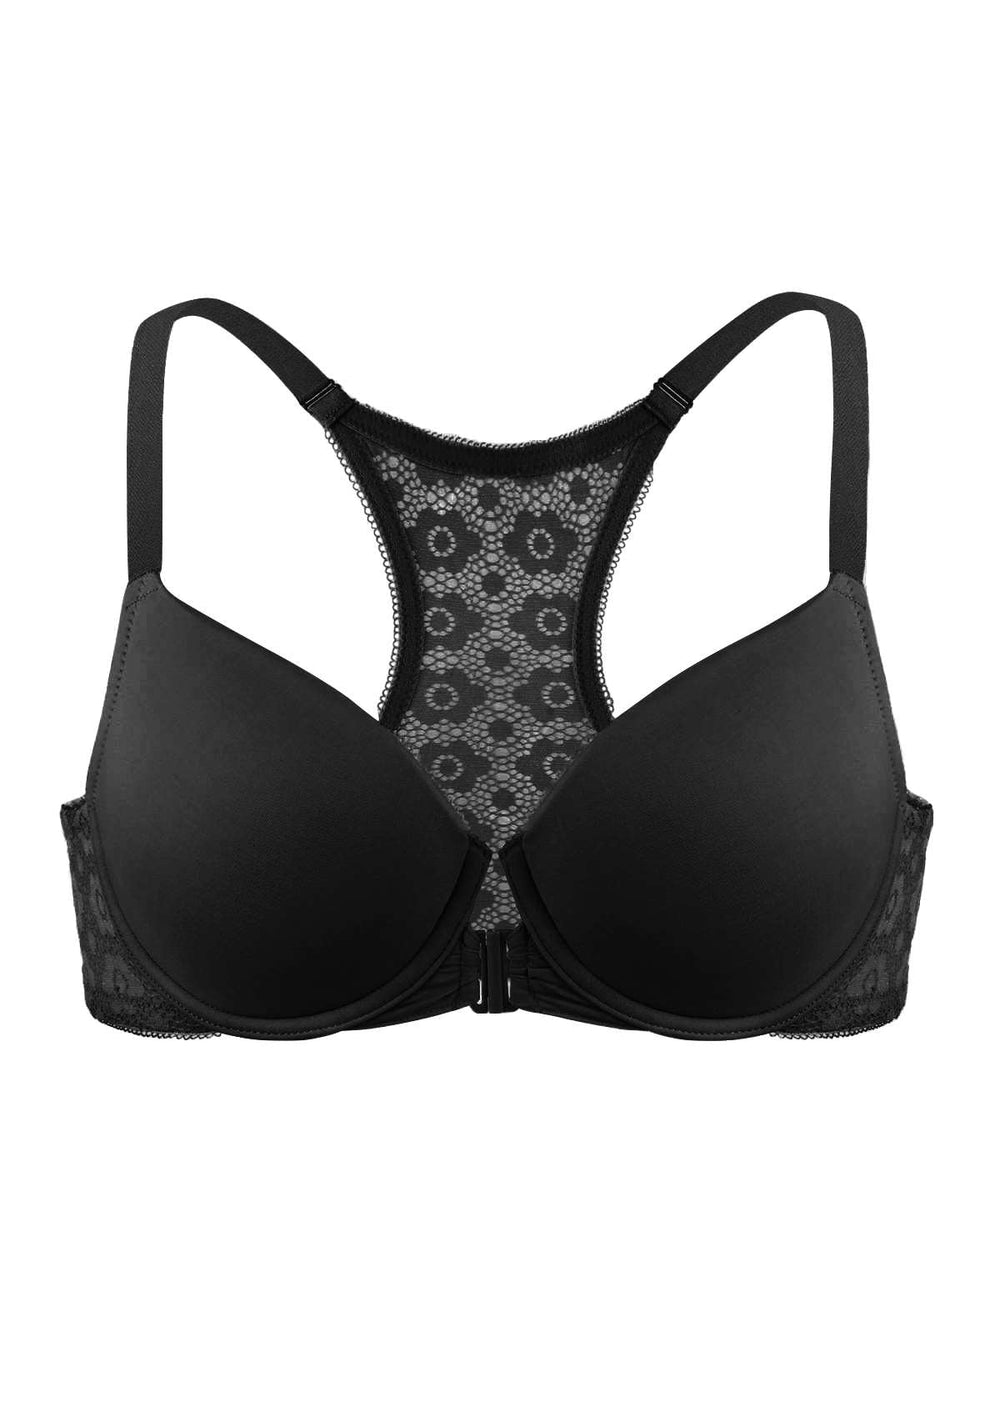 HSIA Serena Front-Close Lace Racerback Underwire Bra for Back Support